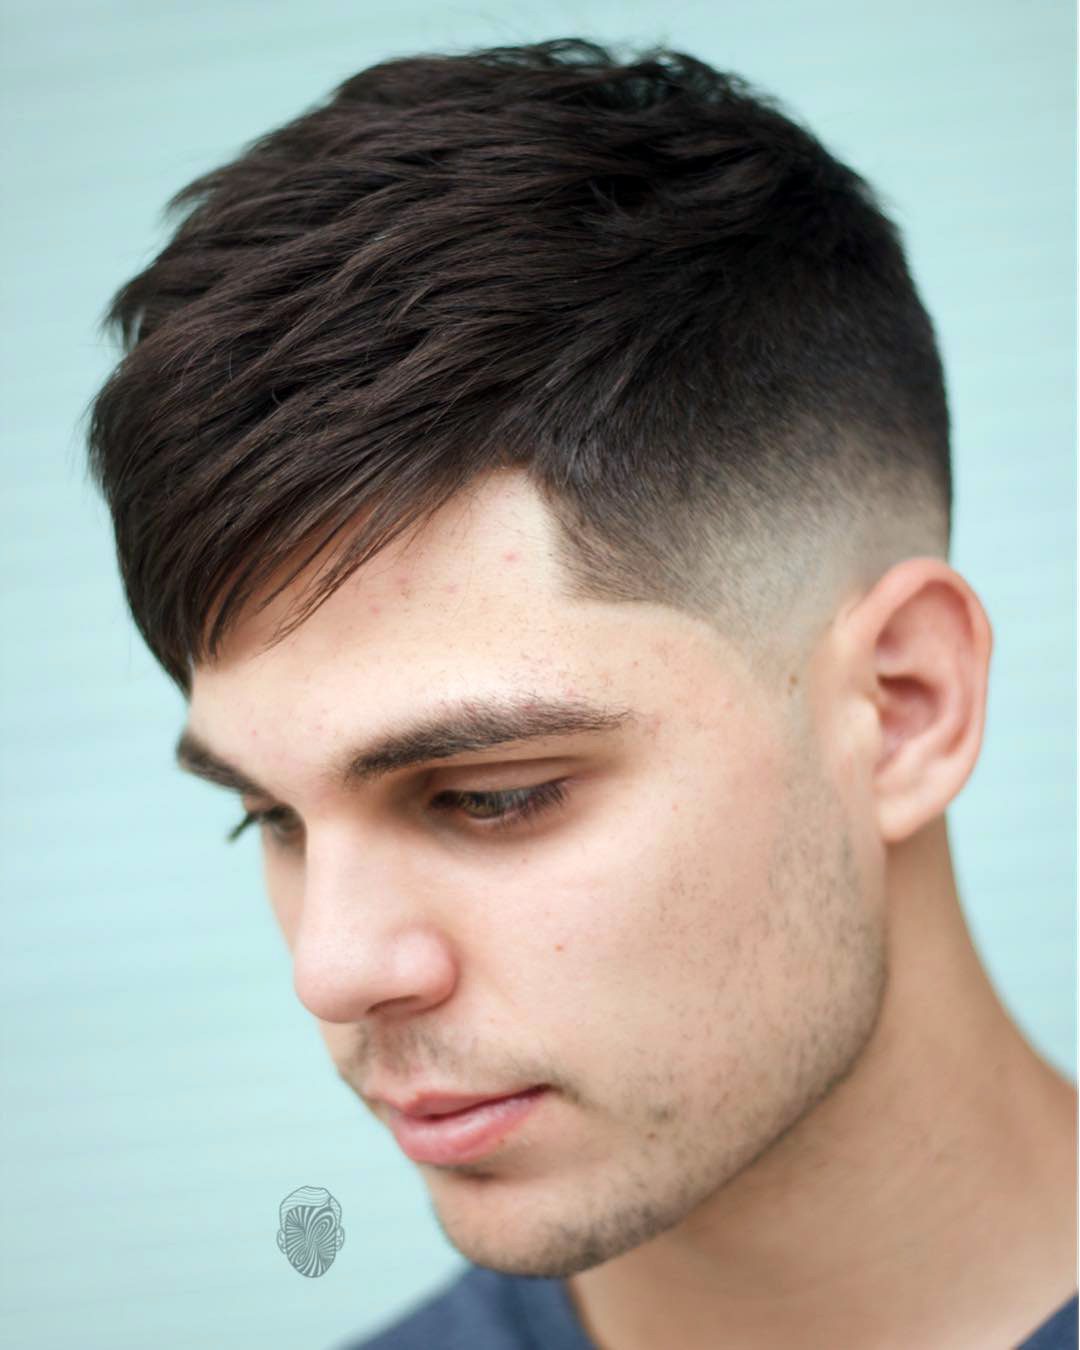 25 Best Haircuts for Guys with Round Faces in 2023 | Round face men, Round face  haircuts, Haircuts for men